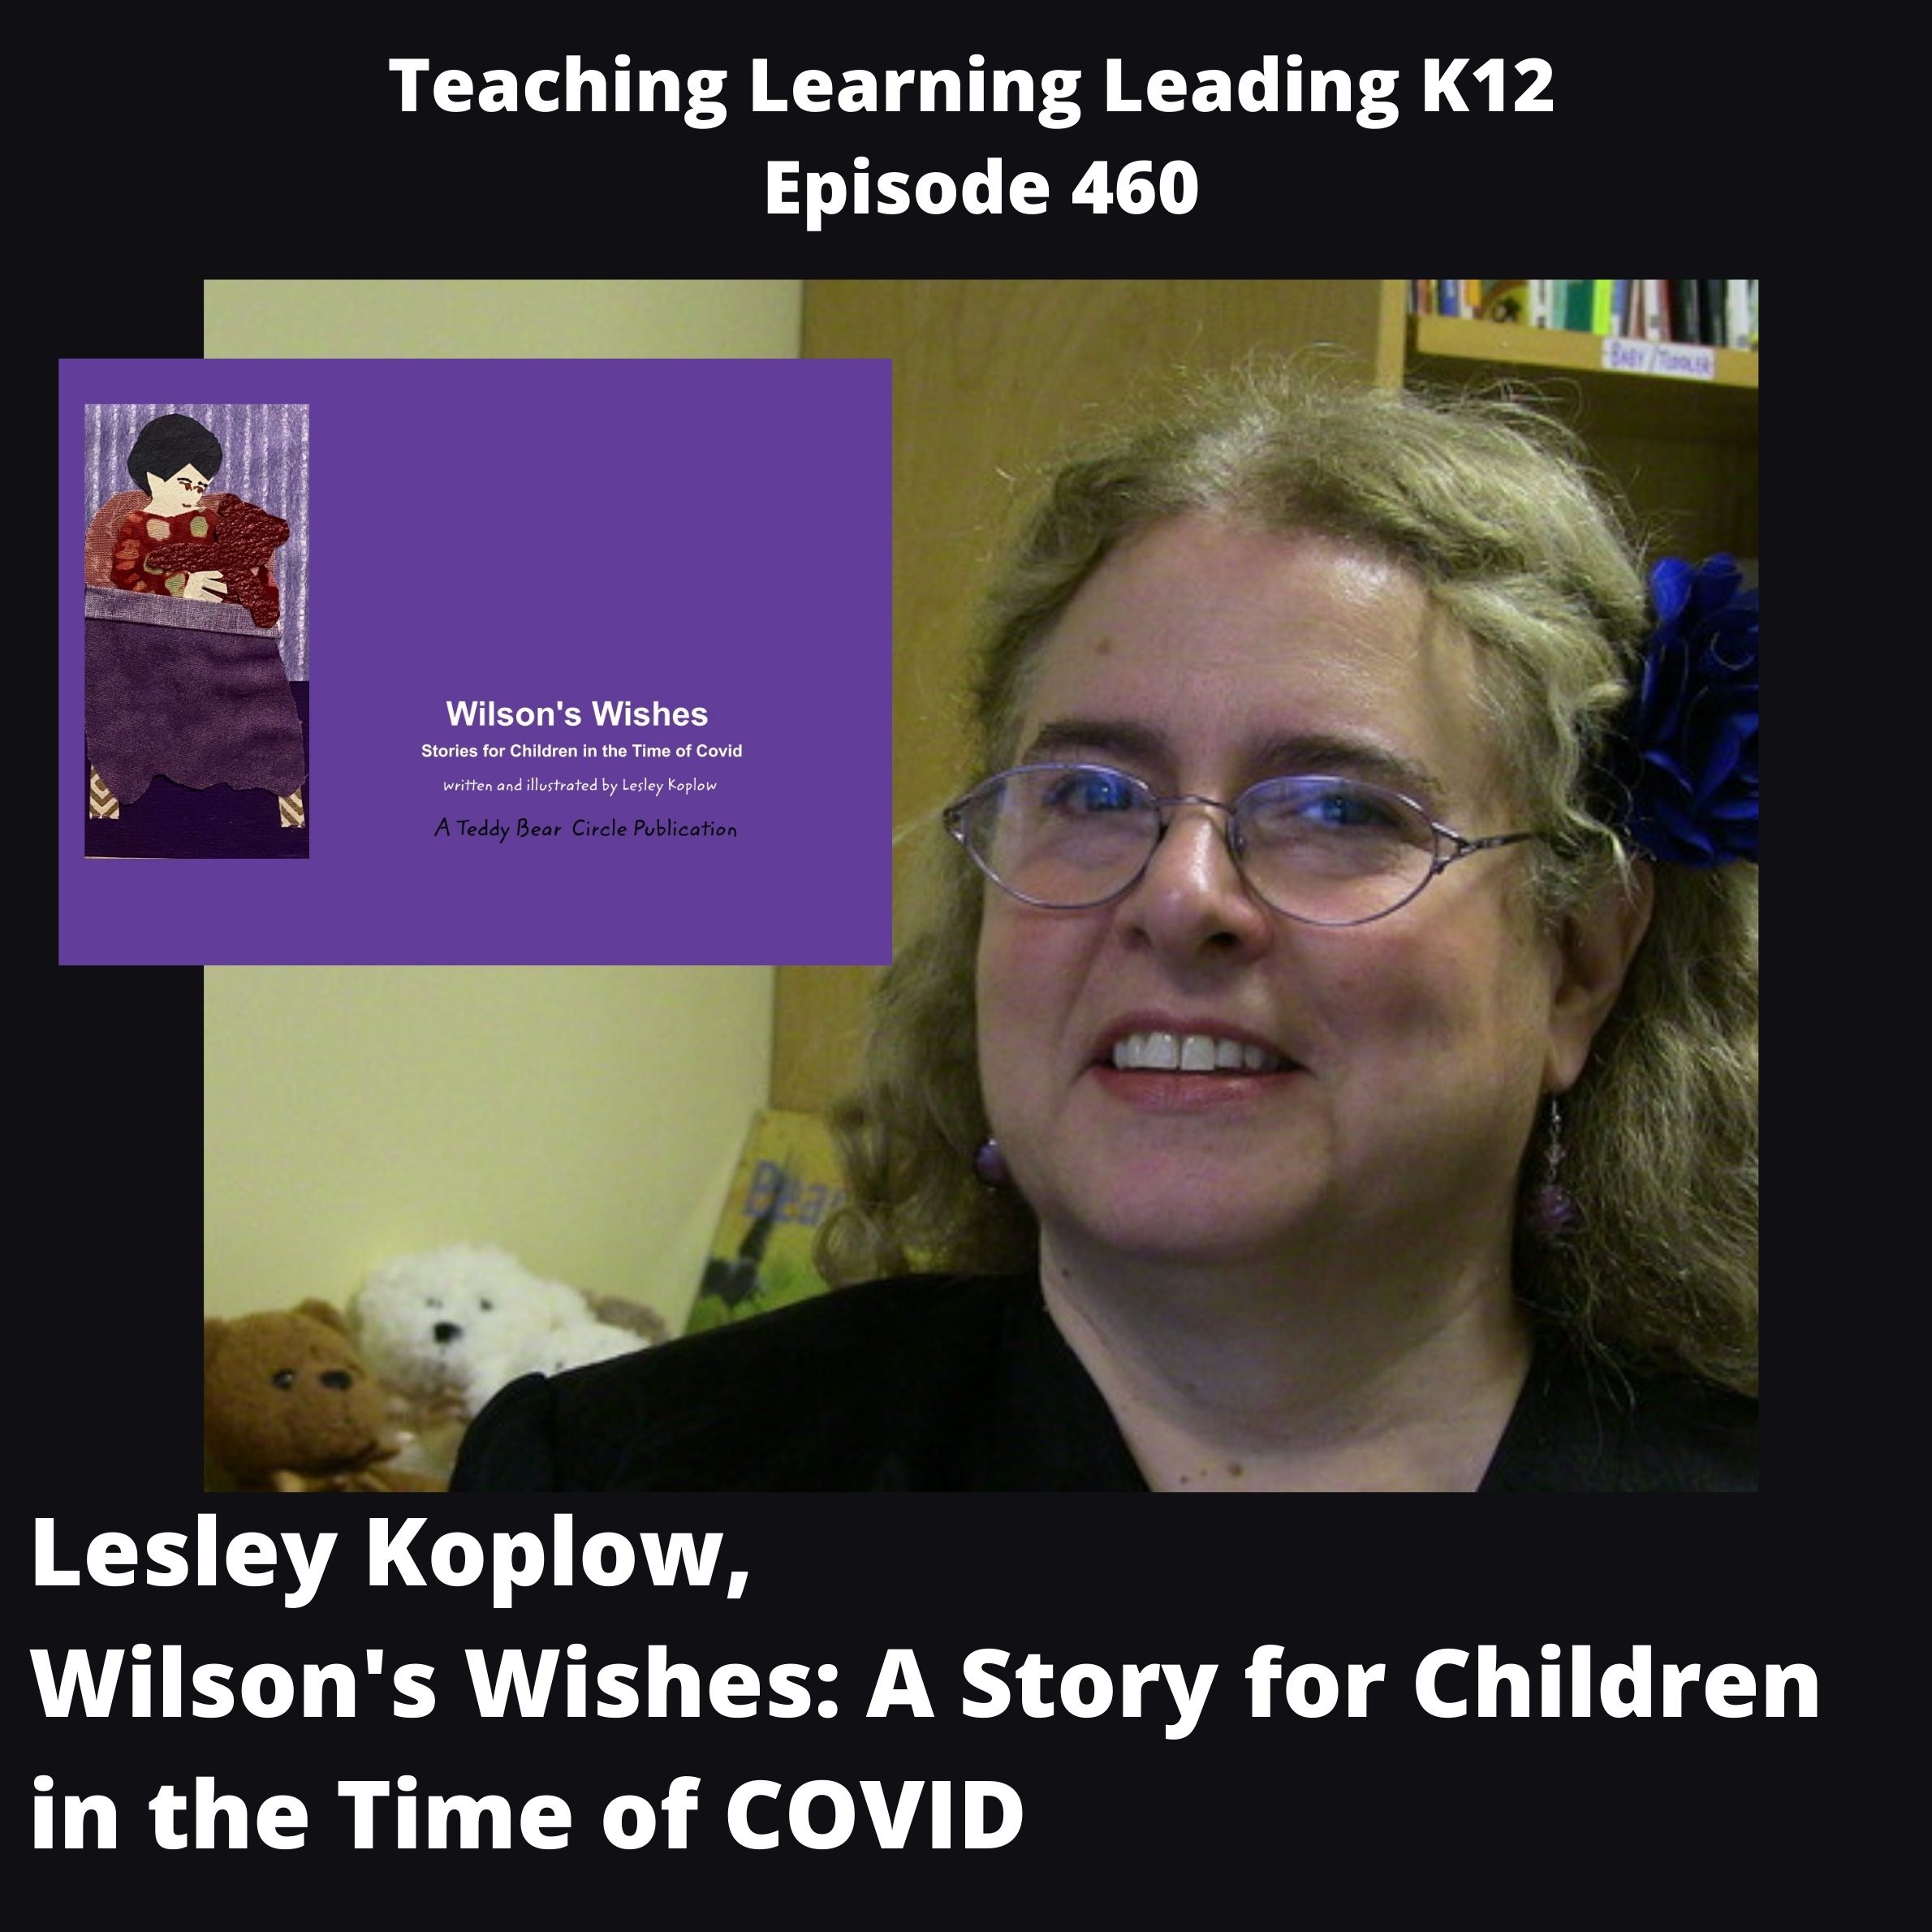 Lesley Koplow - Wilson’s Wishes: A Story for Children in the Time of COVID - 460 Image